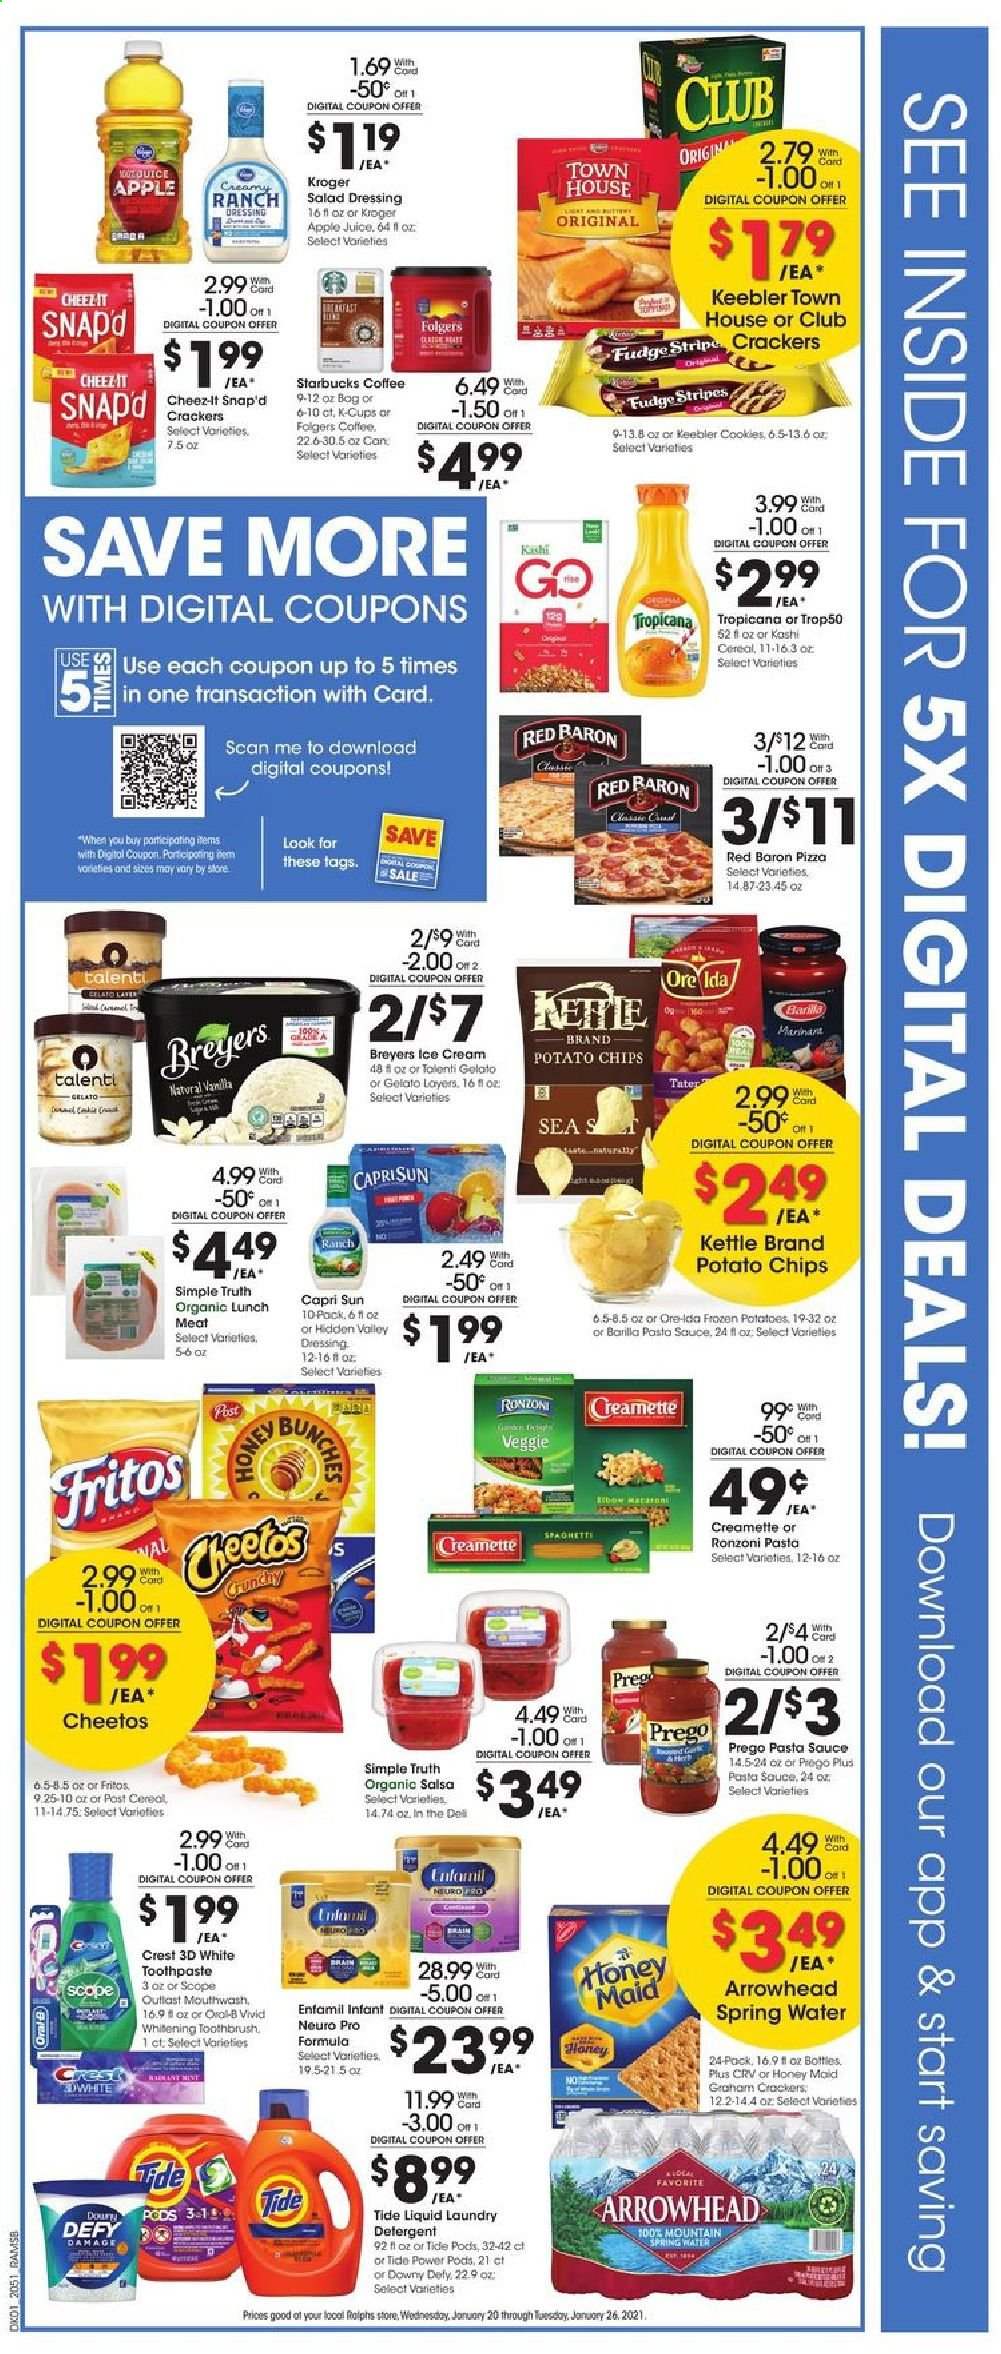 thumbnail - Ralphs Flyer - 01/20/2021 - 01/26/2021 - Sales products - pizza, Barilla, lunch meat, salsa, ice cream, Talenti Gelato, gelato, Ore-Ida, Red Baron, cookies, fudge, crackers, Keebler, potato chips, Cheetos, Cheez-It, cereals, Fritos, Honey Maid, spaghetti, Creamette, salad dressing, pasta sauce, dressing, apple juice, Capri Sun, juice, spring water, coffee, Starbucks, Folgers, coffee capsules, K-Cups, Enfamil, detergent, Tide, laundry detergent, toothbrush, toothpaste, mouthwash, Crest, bunches. Page 2.